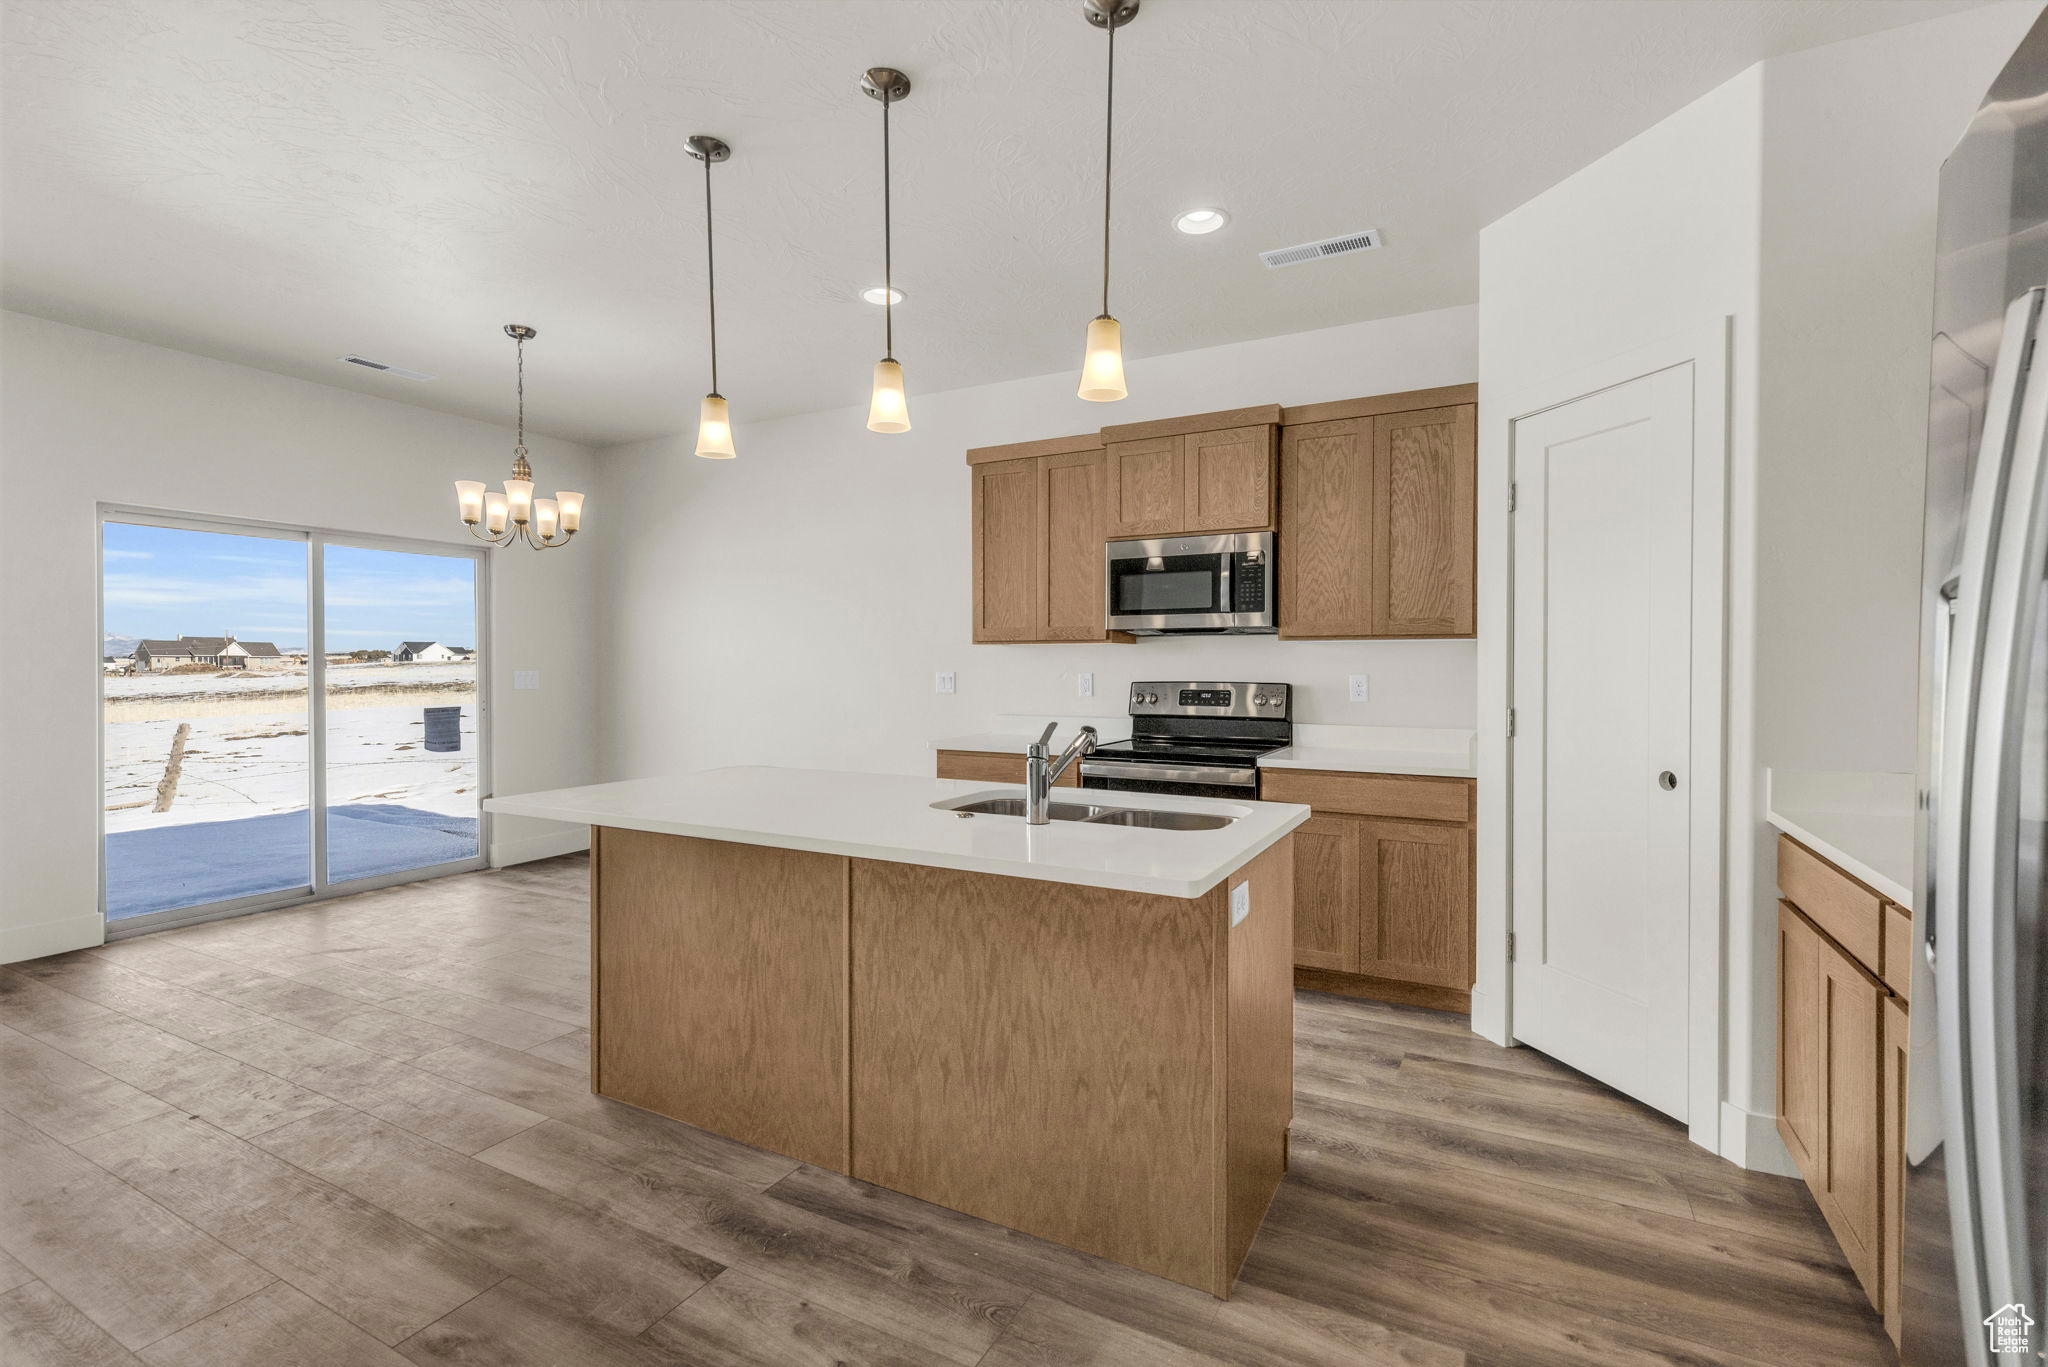 Kitchen featuring light hardwood / wood-style flooring, decorative light fixtures, an island with sink, and stainless steel appliances